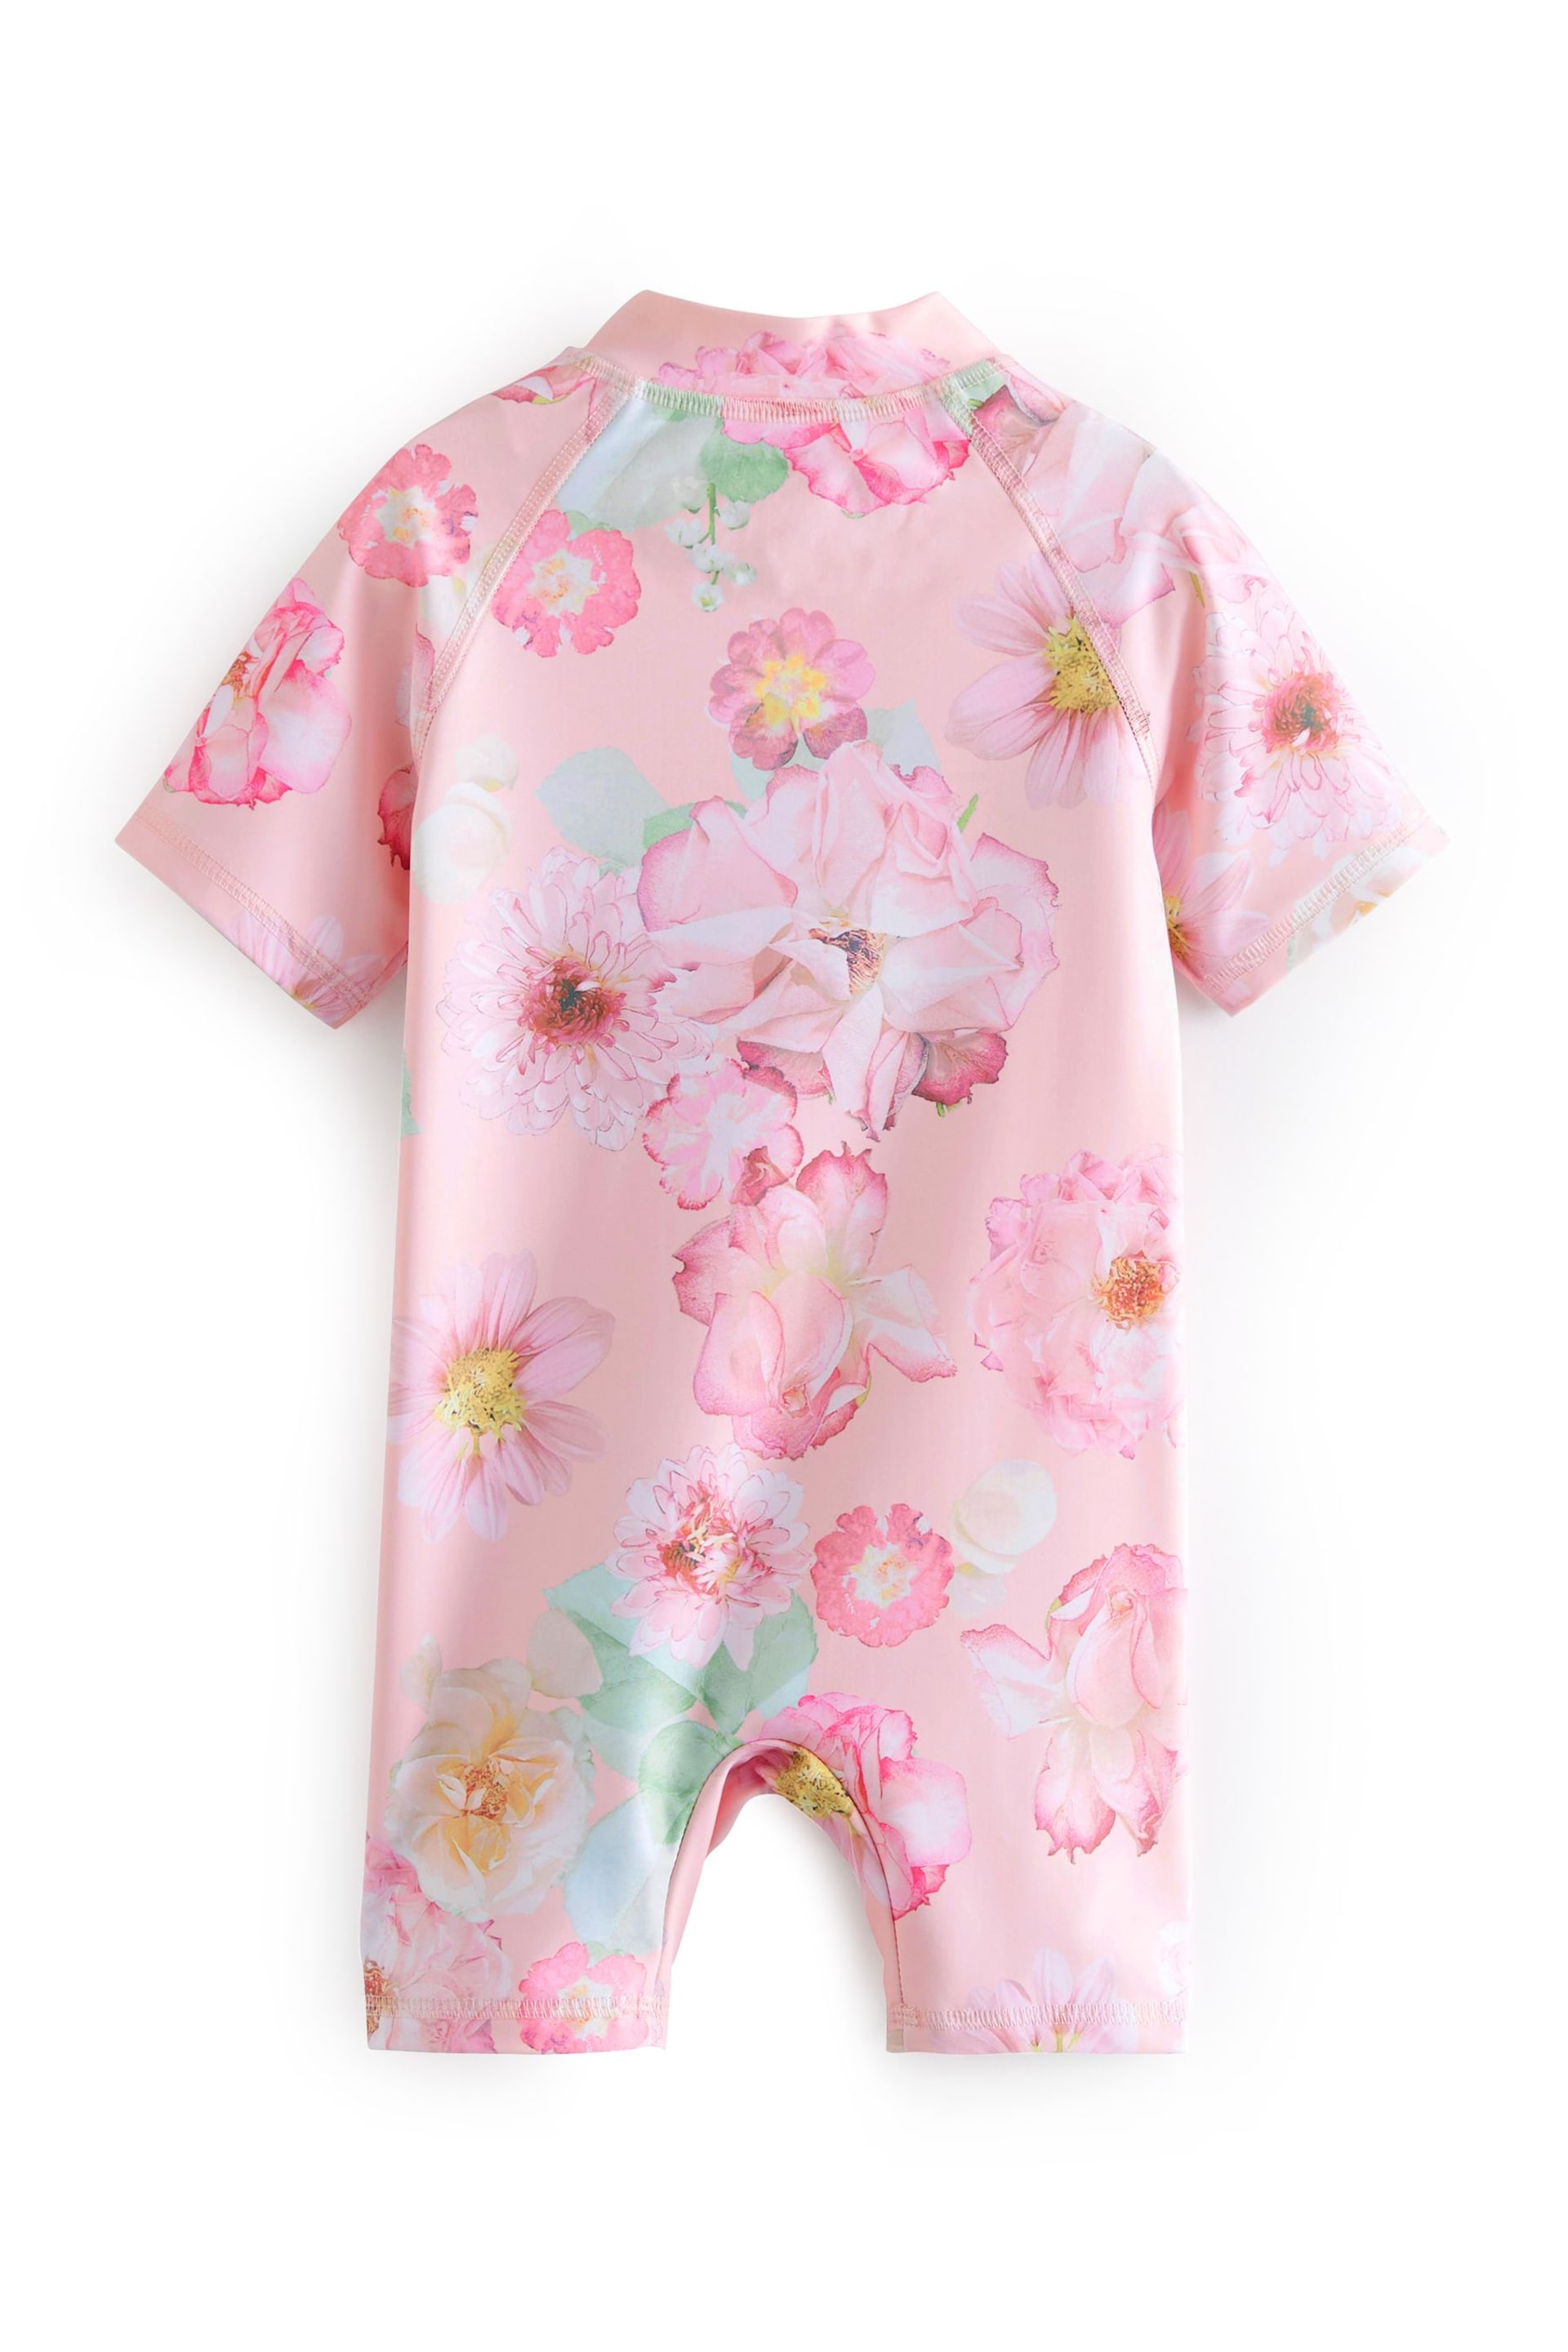 Pink Floral Sunsafe Swimsuit (3mths-7yrs) - Image 7 of 8